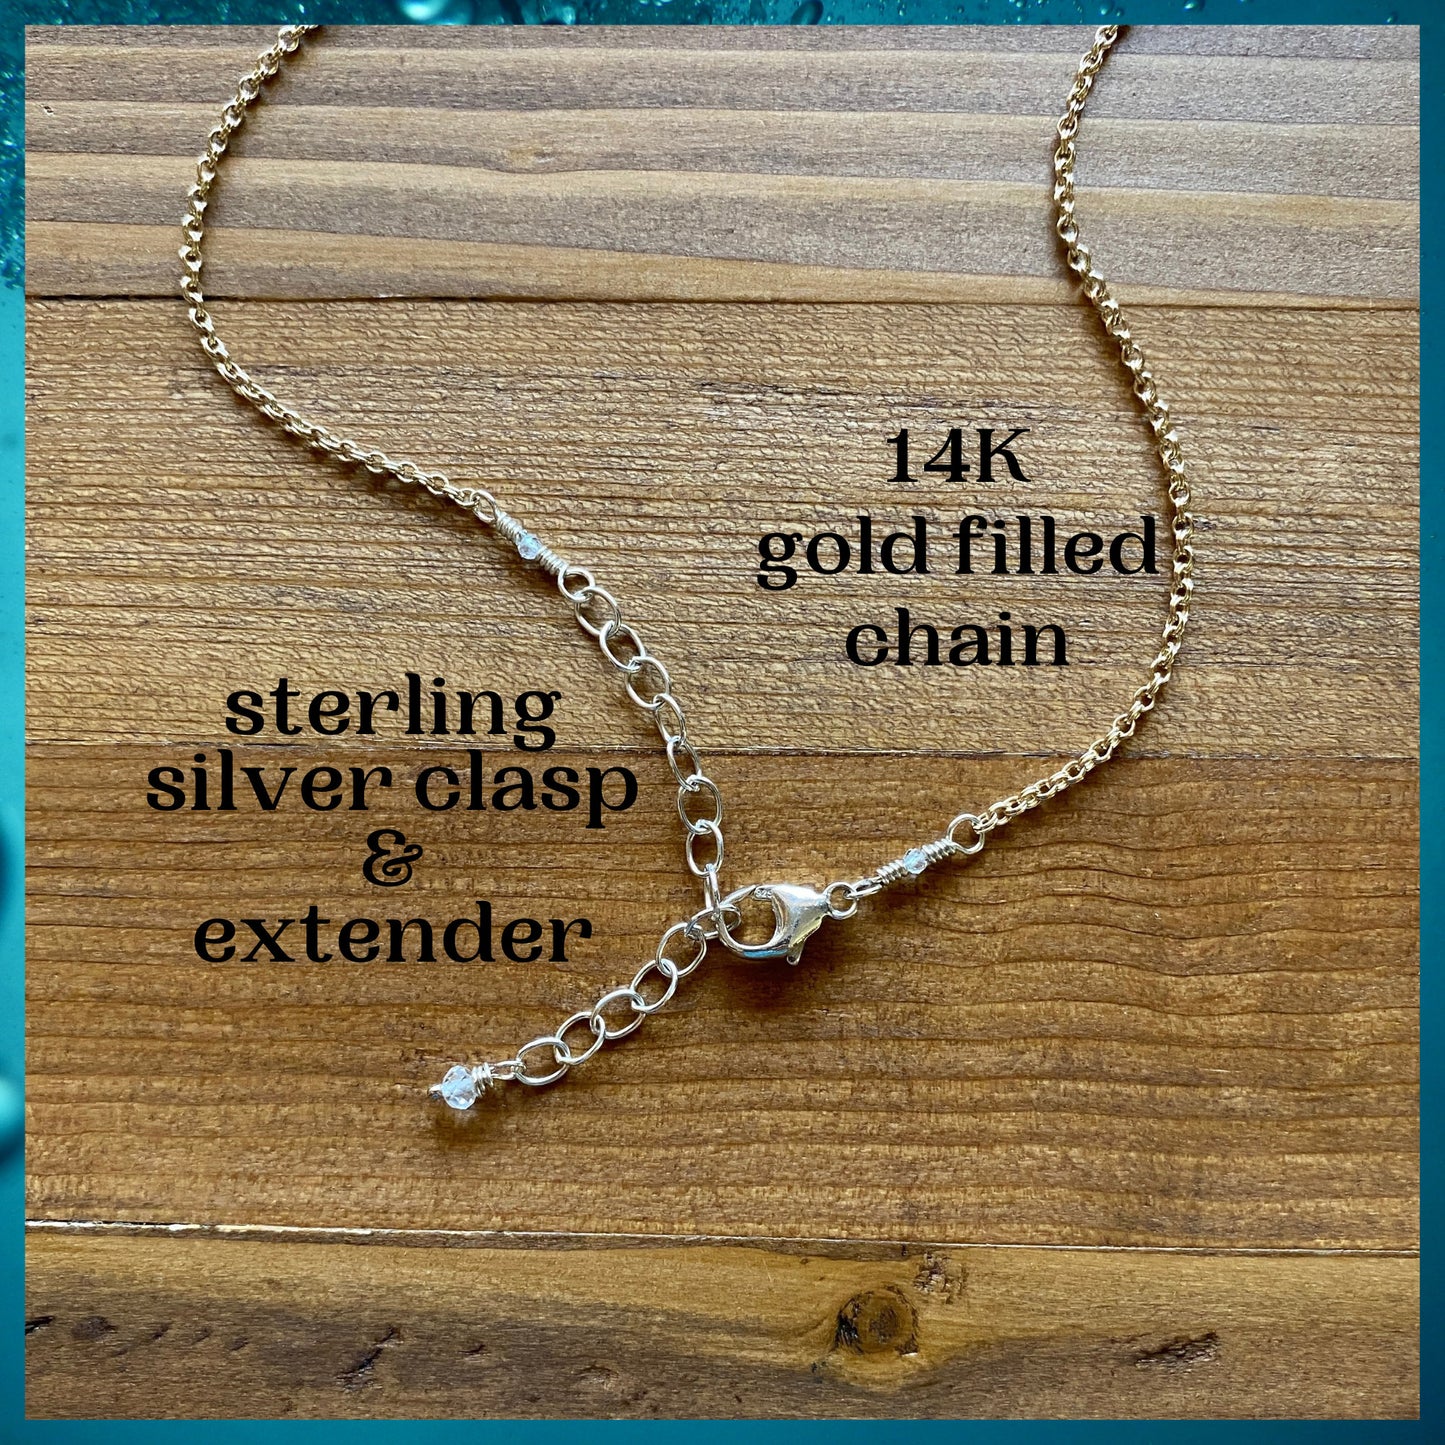 20th Birthday Bold Mixed Metal Milestone Necklace, Sparkly Circles Handmade Pendant on 14K Gold Filled Chain Friendship, 2 Friends Sisters